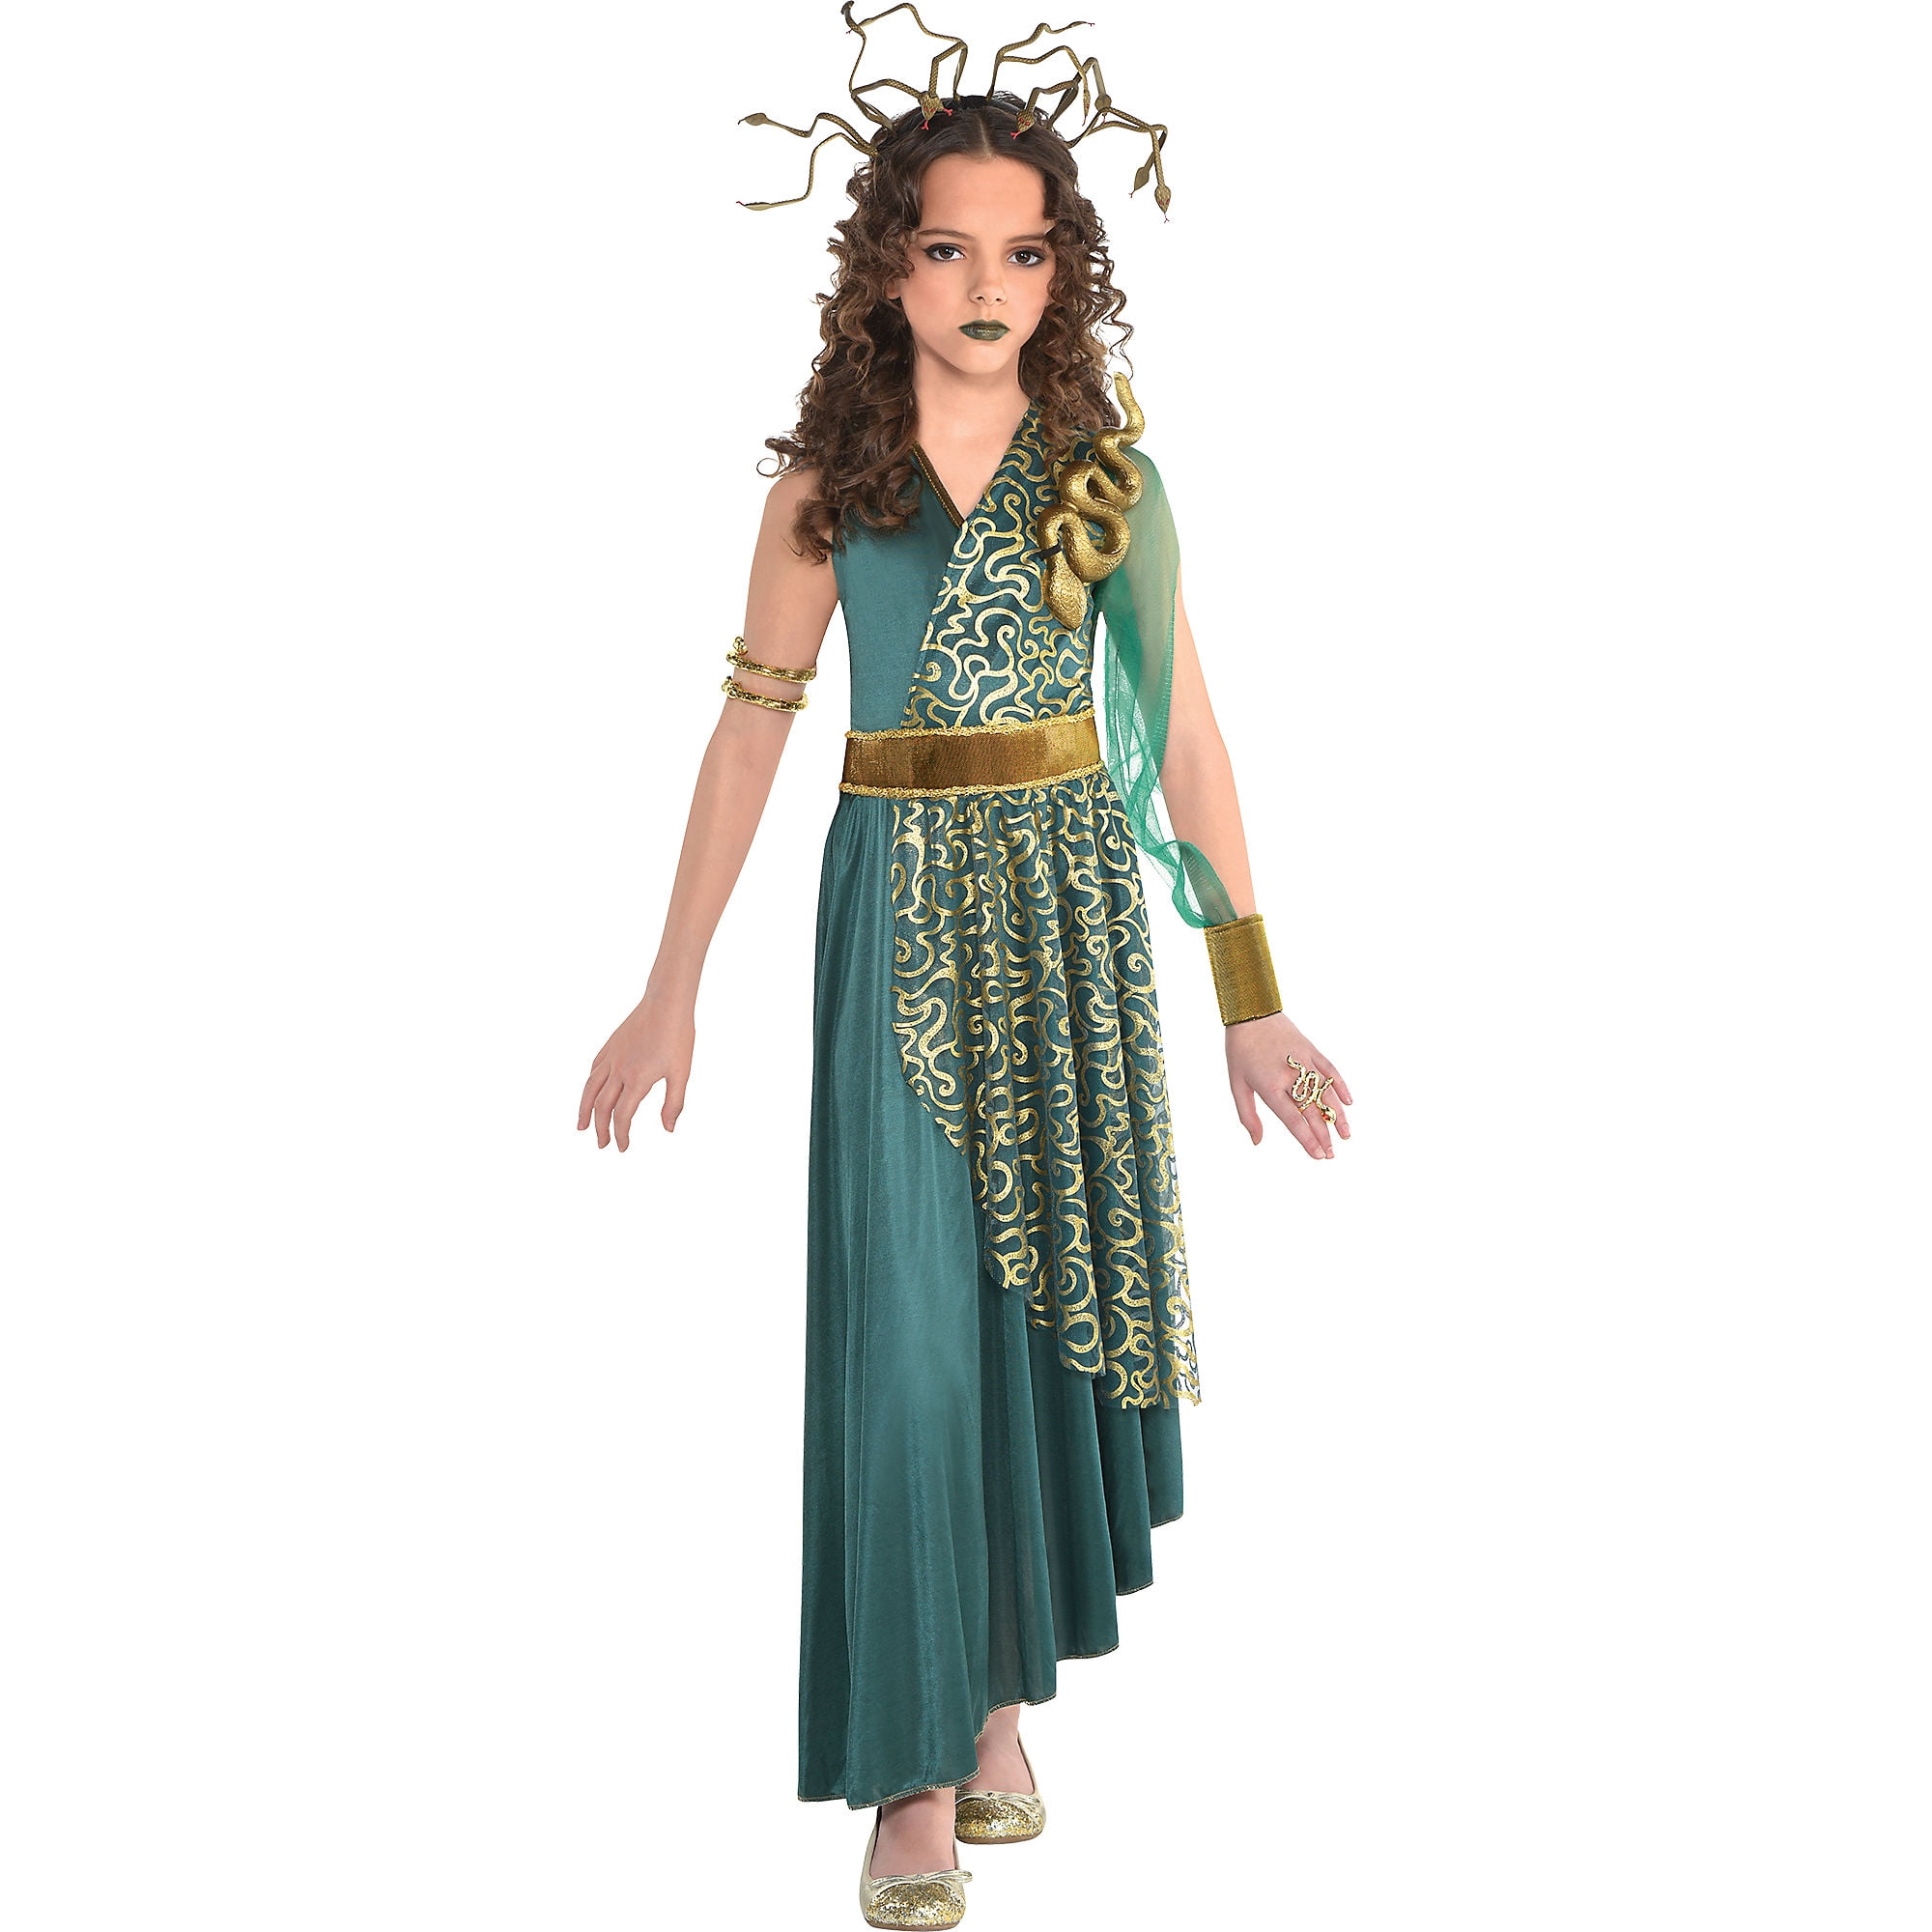 Suit Yourself Medusa Halloween Costume for Girls, Includes Dress and Headdr...